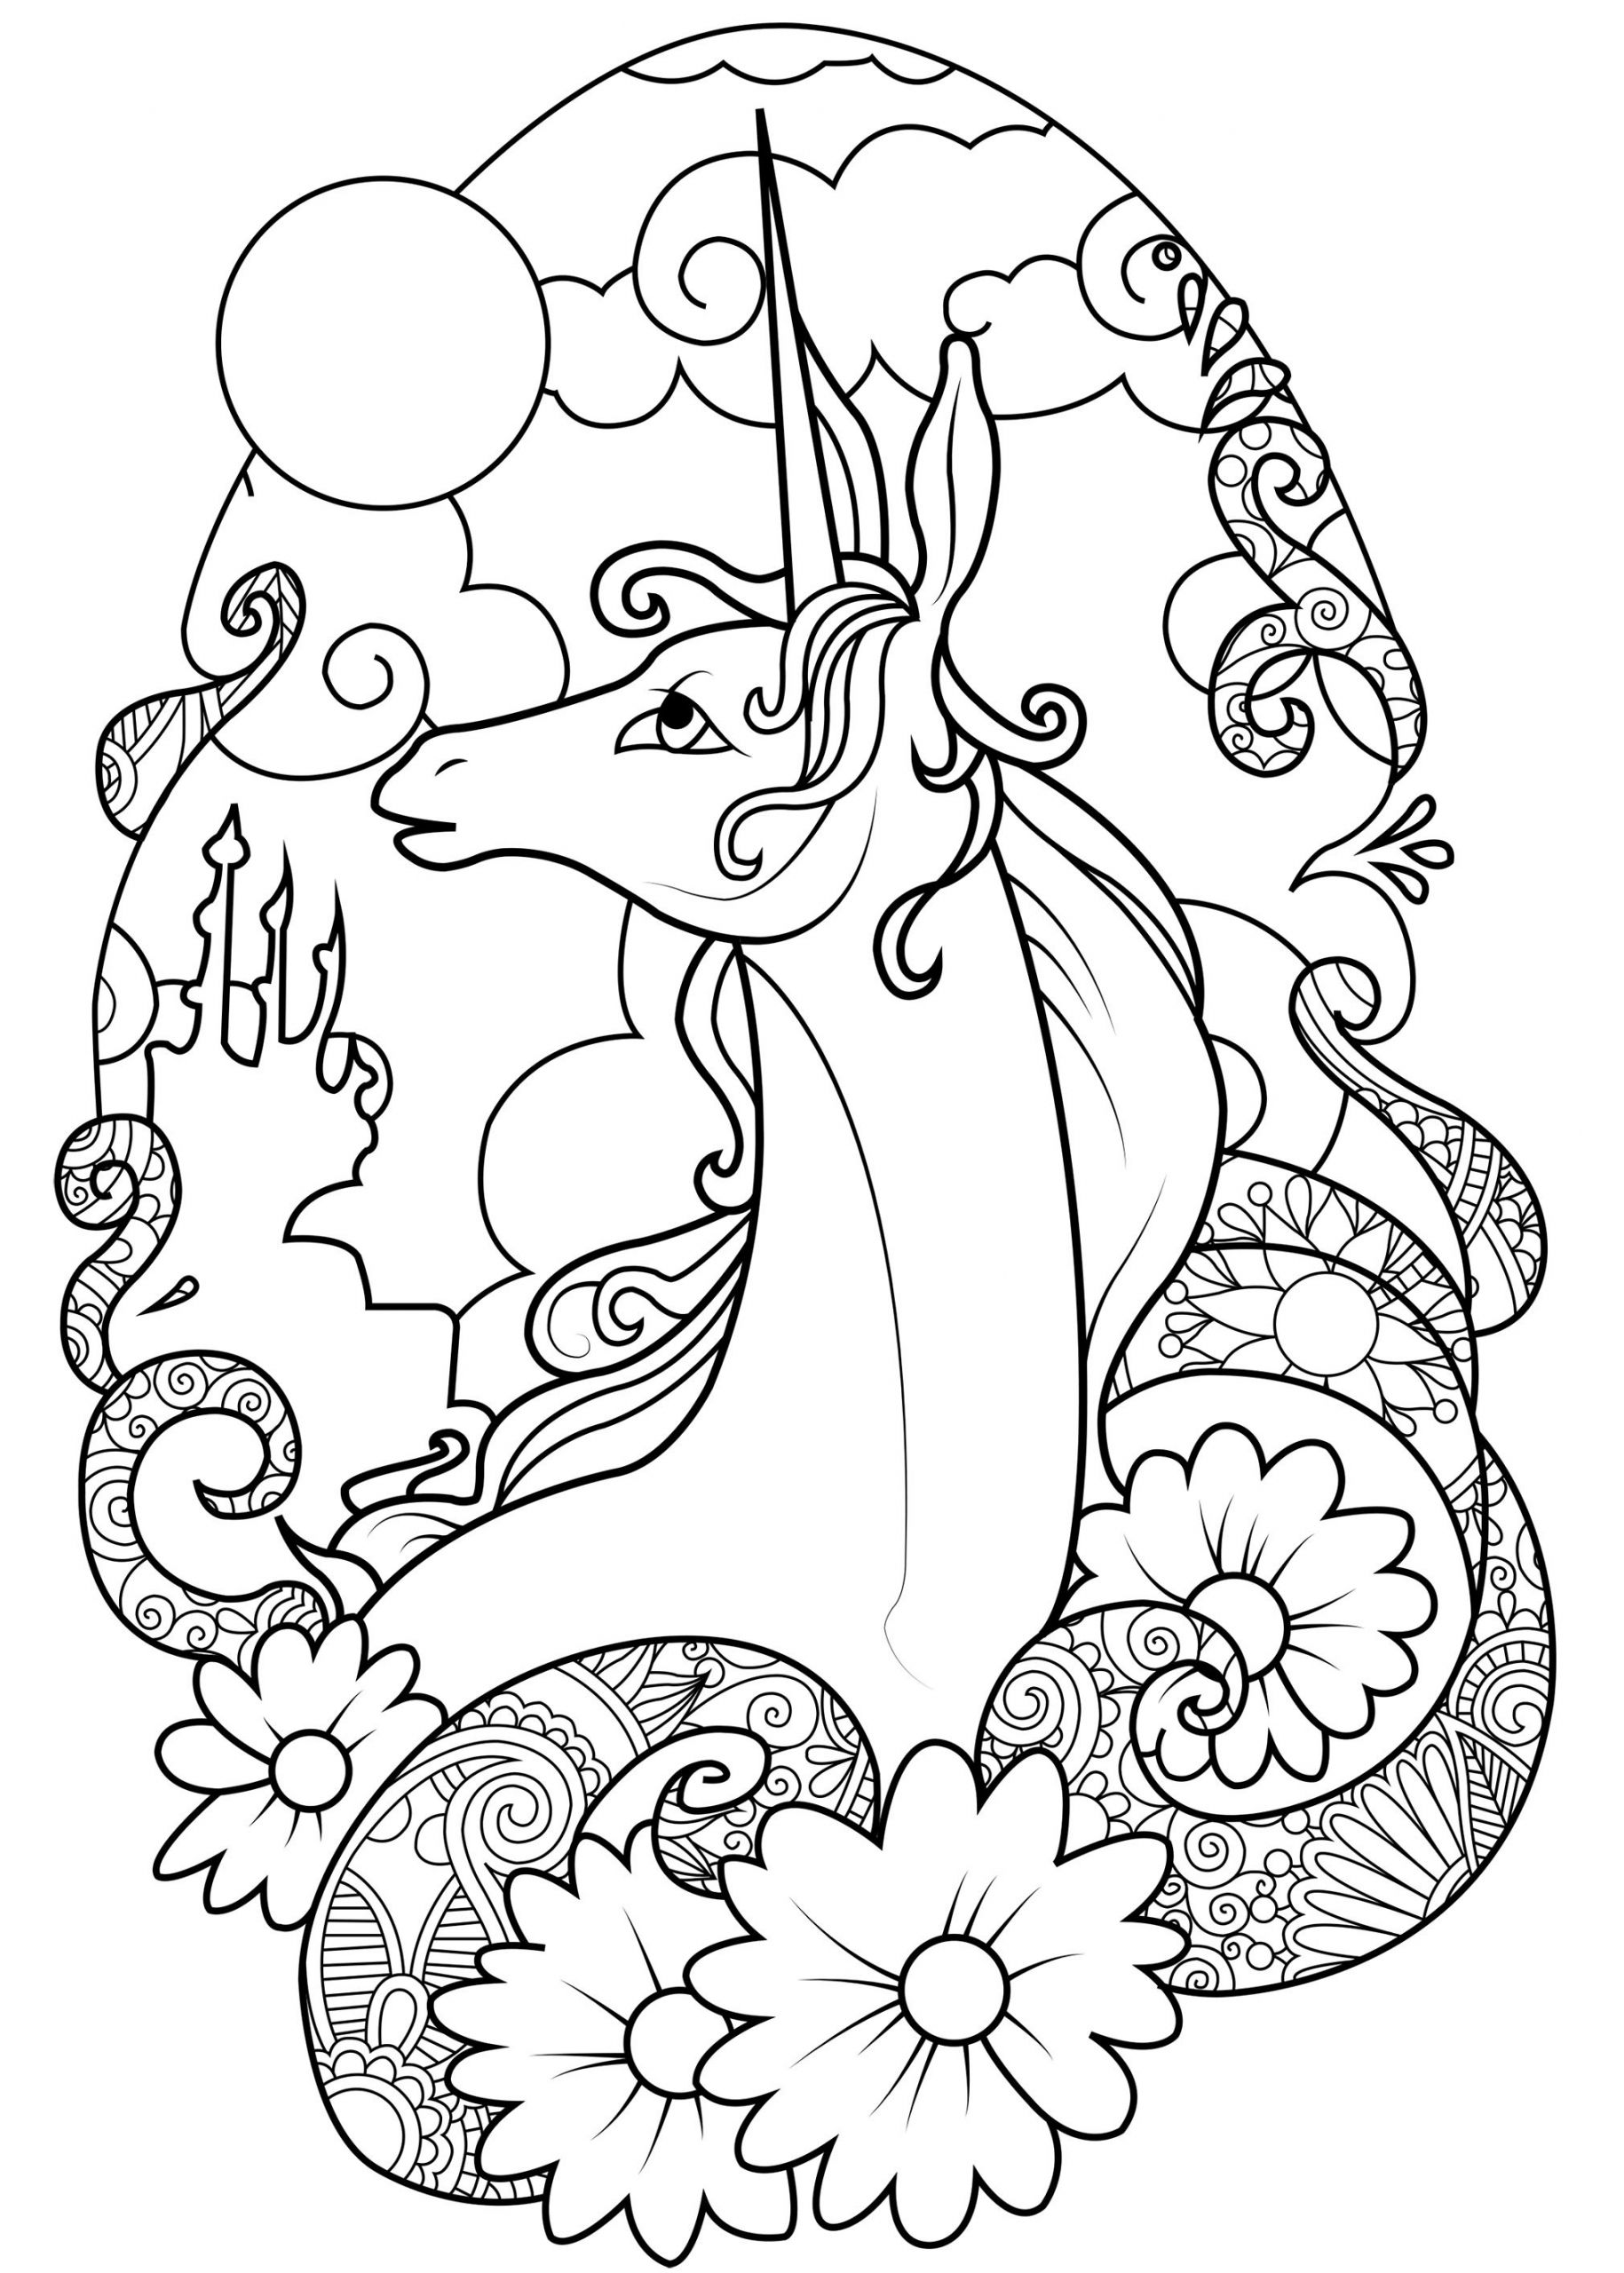 Unicorn Adult Coloring Book
 Fairy unicorn Unicorns Adult Coloring Pages